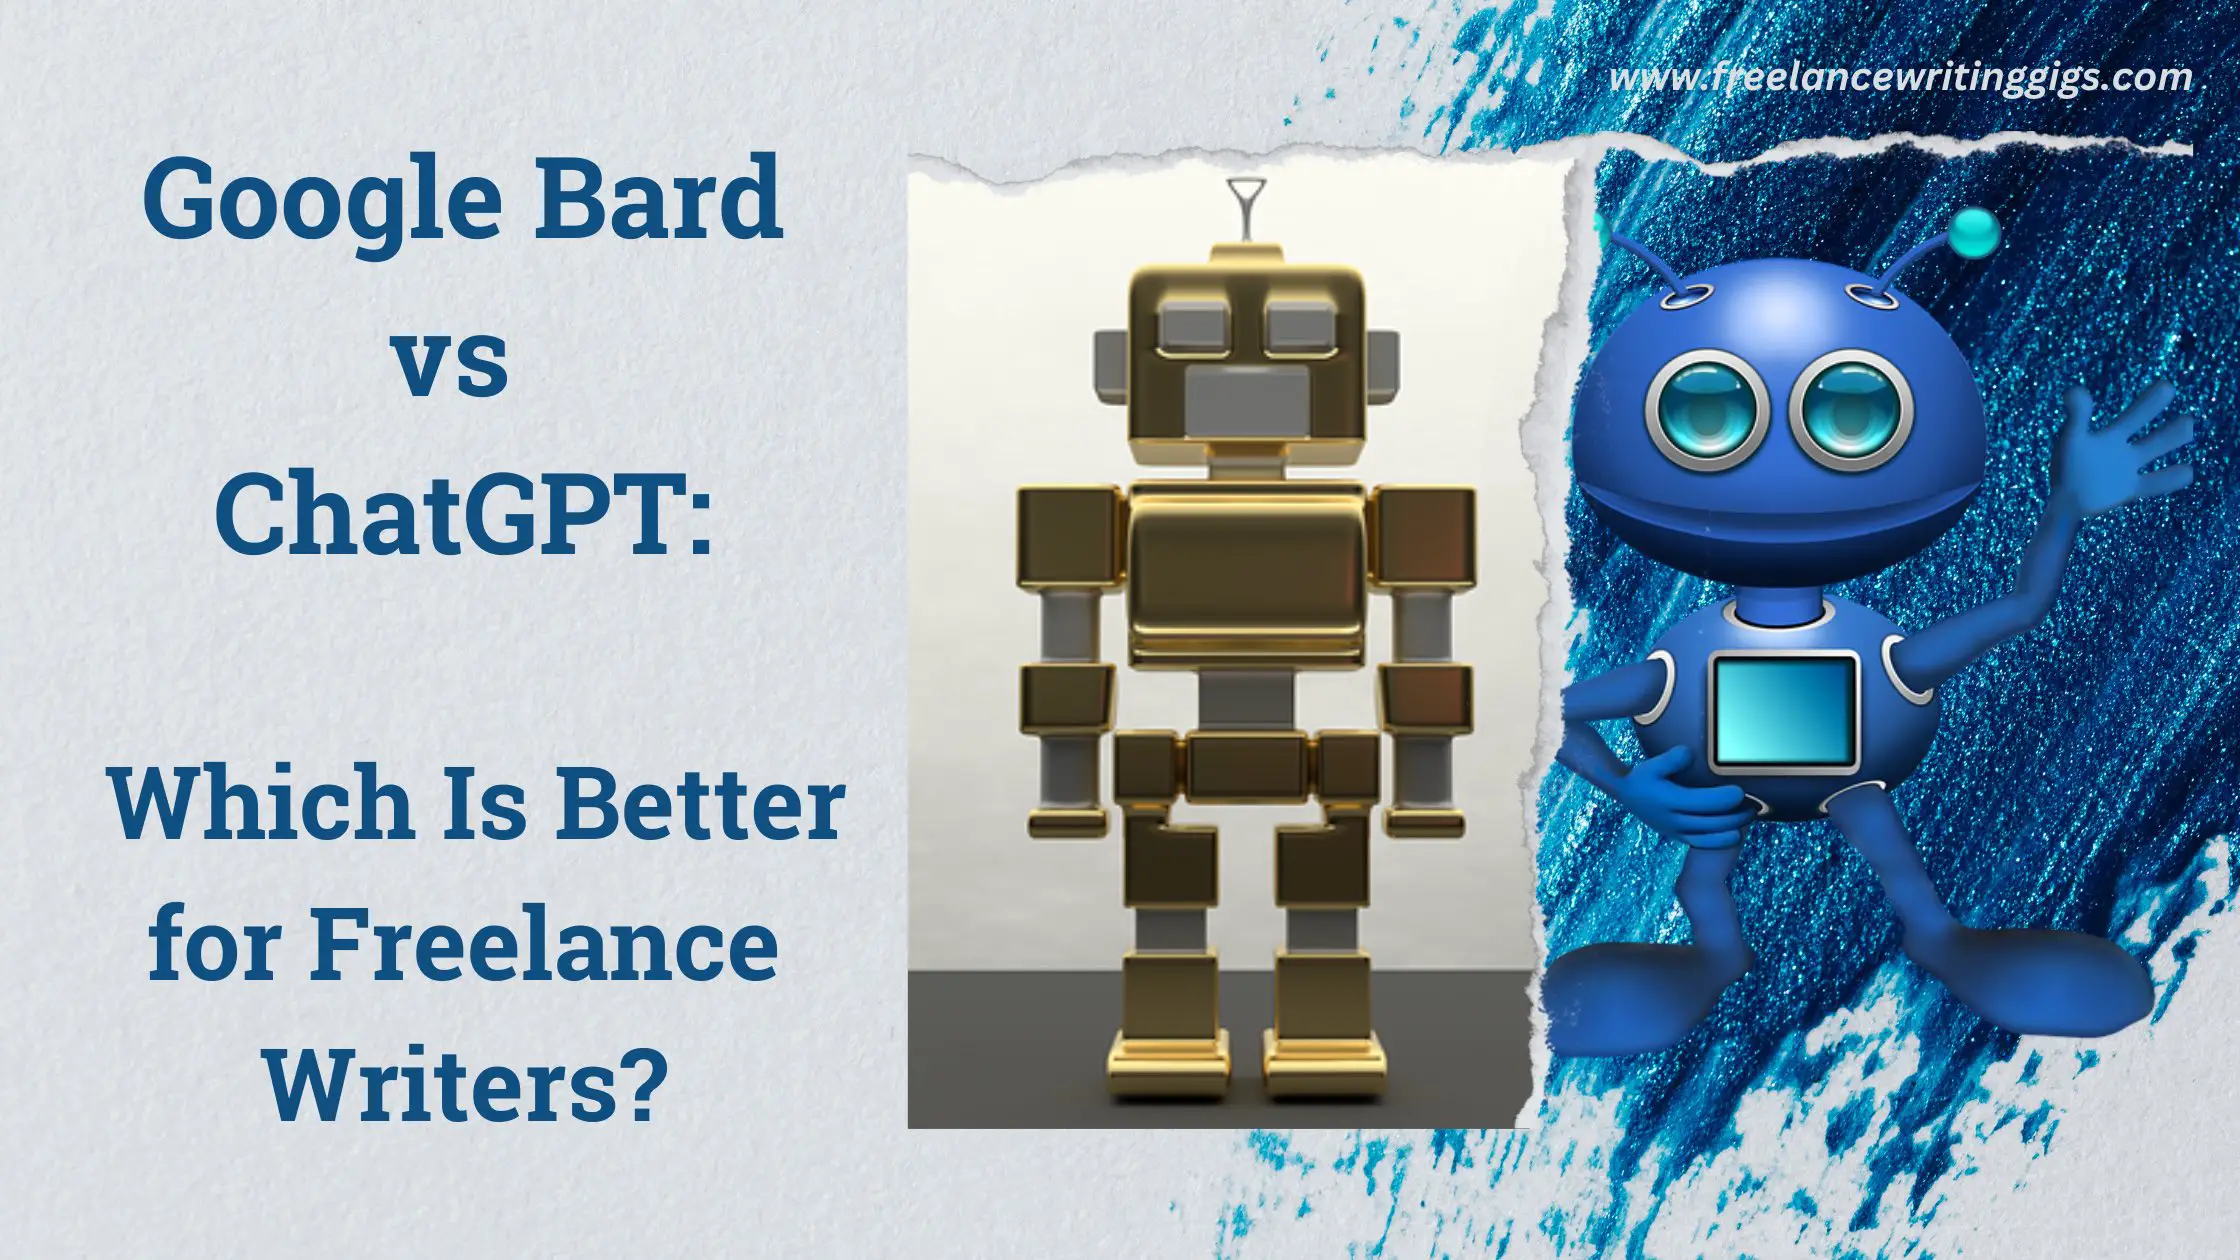 Google Bard vs ChatGPT: Which Is Better for Freelance Writers?